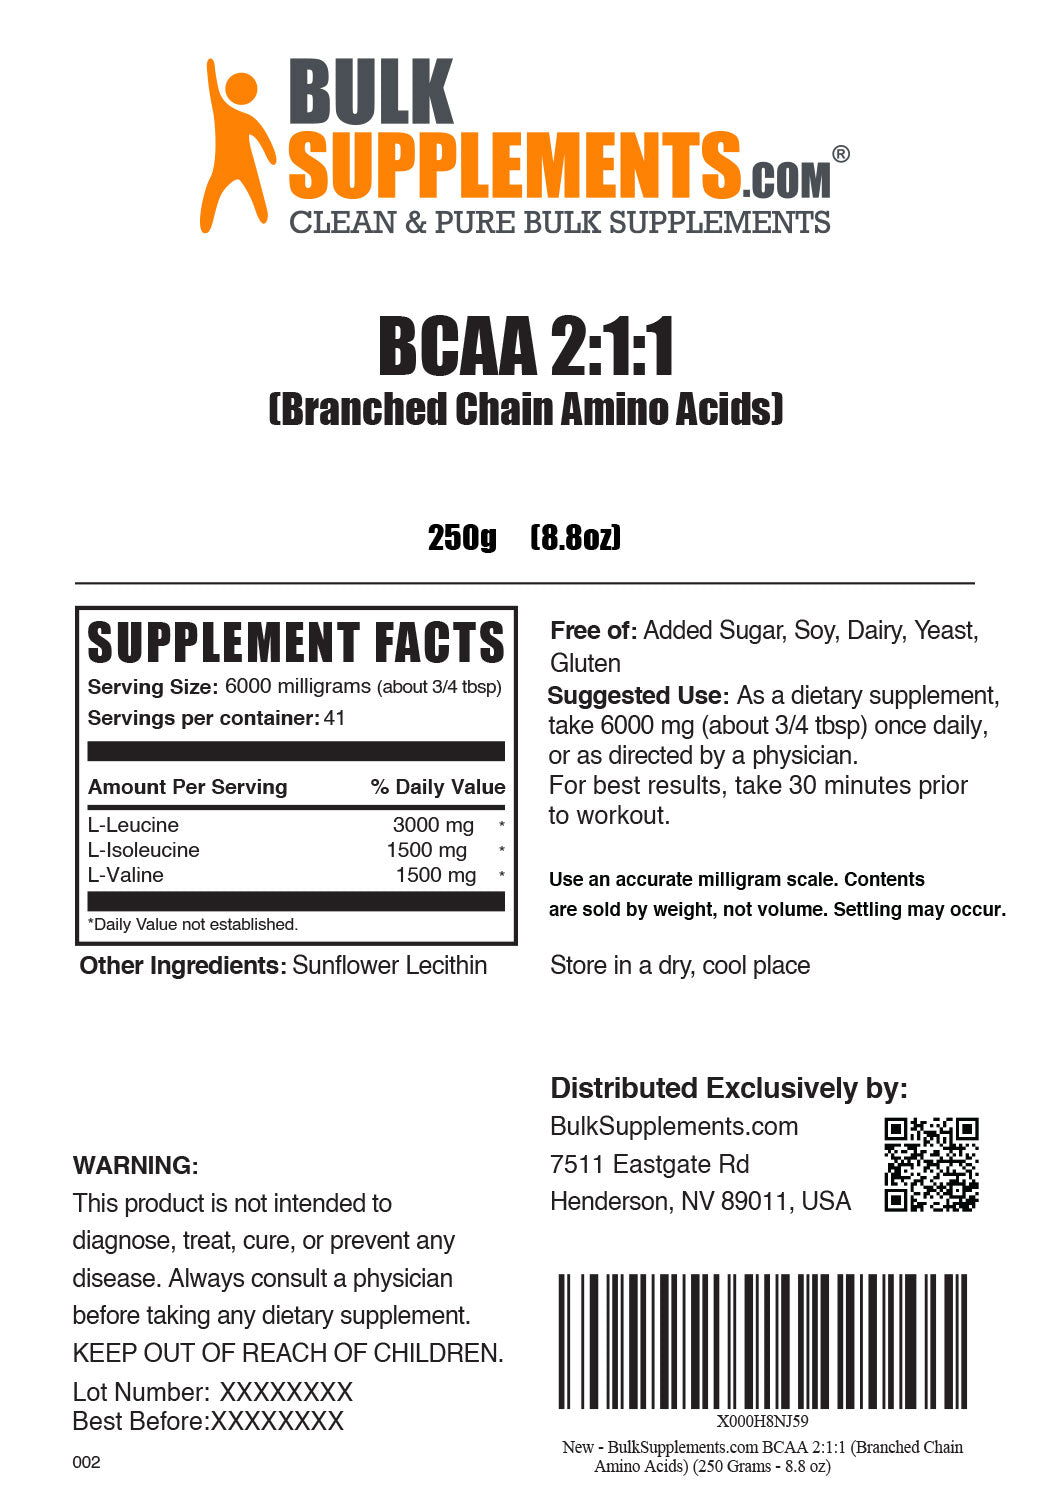 BCAA Powder Supplement Nutritional Facts and Serving Size for 250g bag